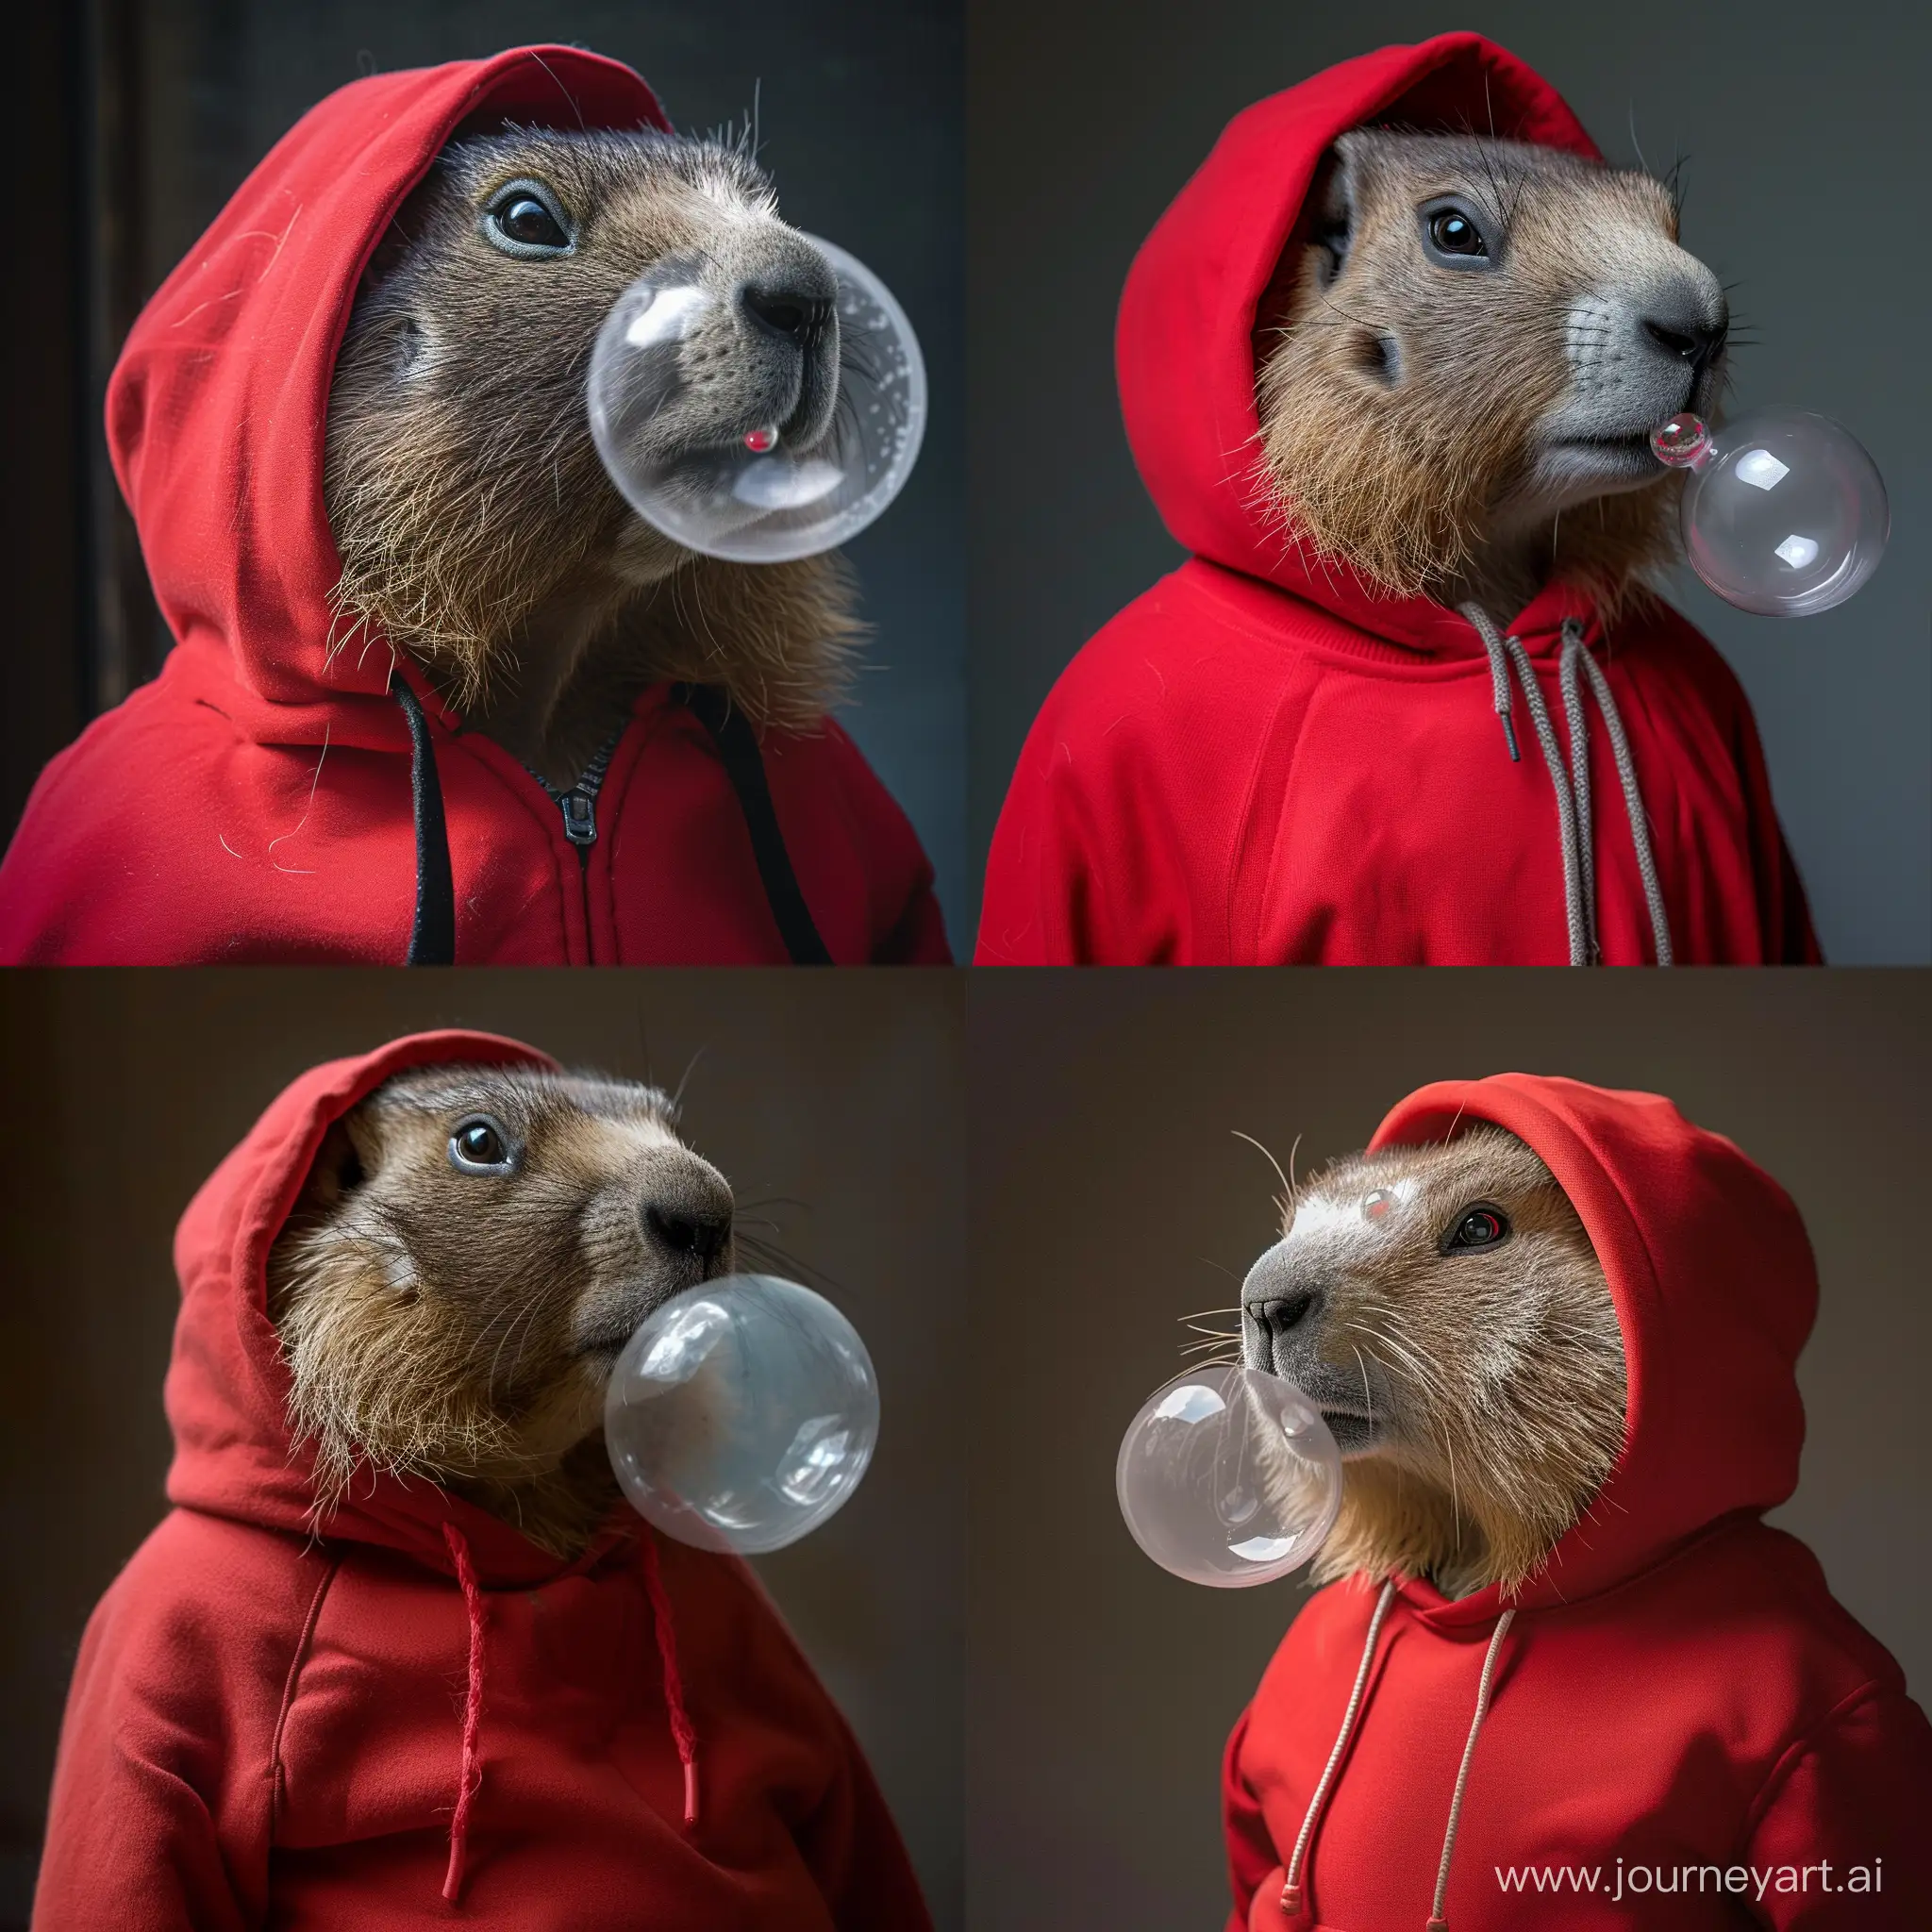 Charming-Himalayan-Marmot-in-Playful-Red-Hoodie-Blowing-Bubble-Gum